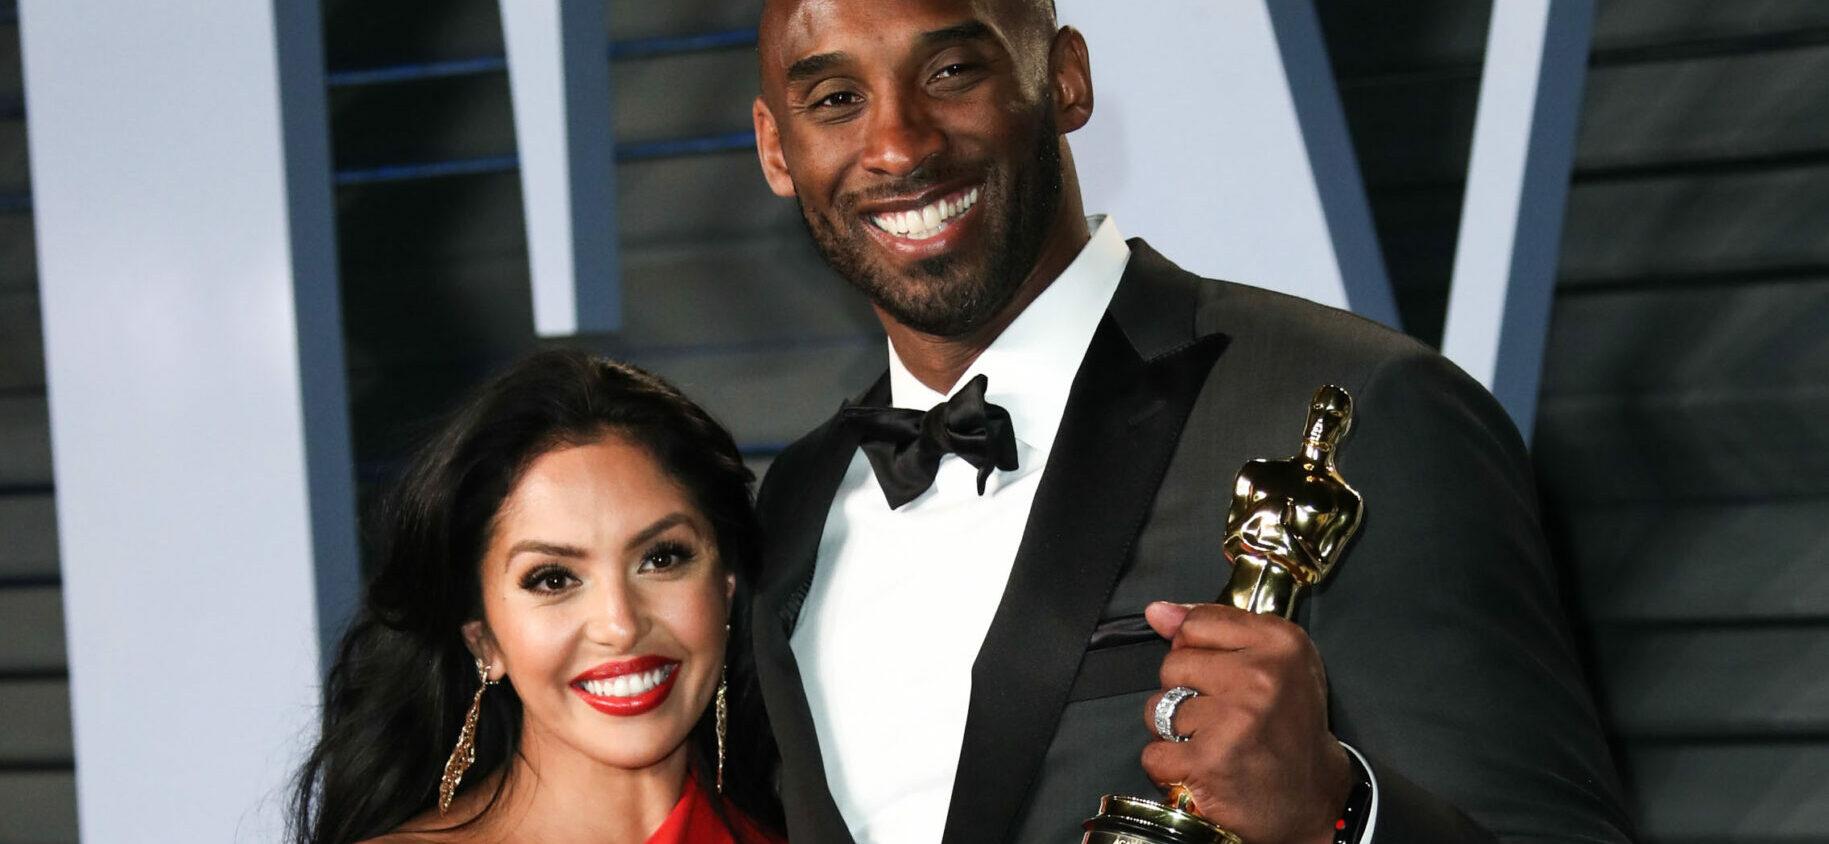 Kobe Bryant’s Widow, Vanessa Bryant, Settles Lawsuit Against Helicopter Company Over Deadly Crash